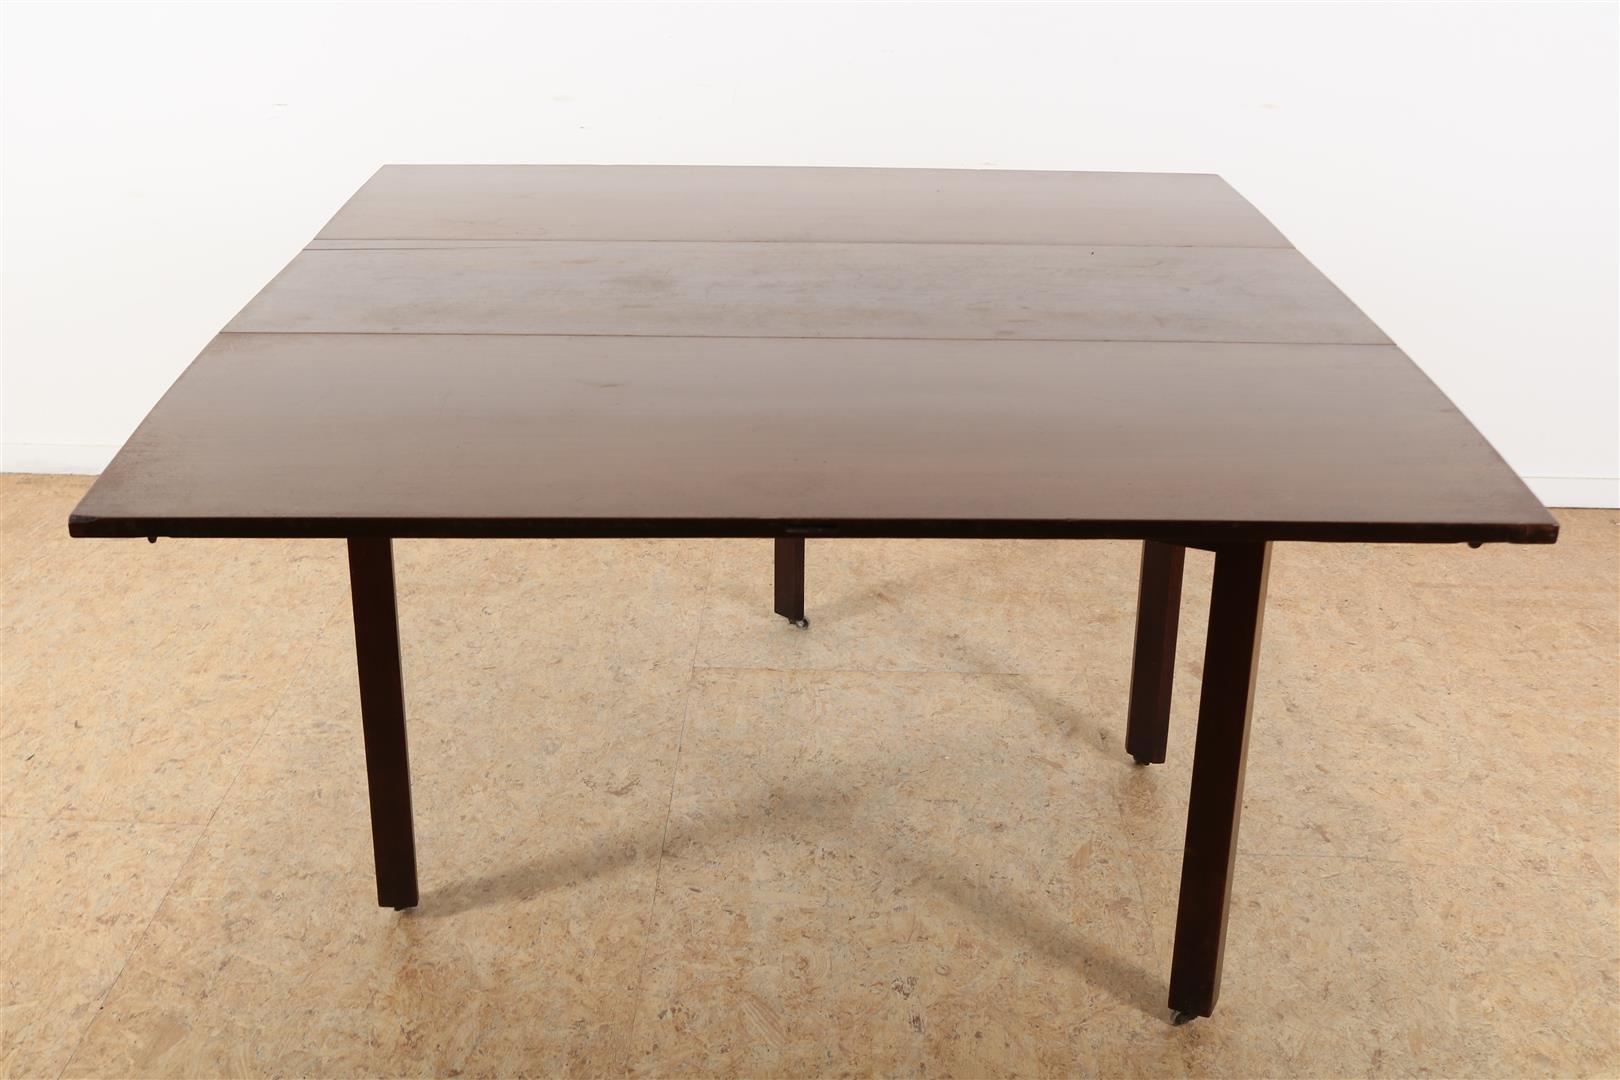 Mahogany drop-leaf table on block legs, 72 x 140 x 124 cm. (scratches on page) - Image 2 of 5